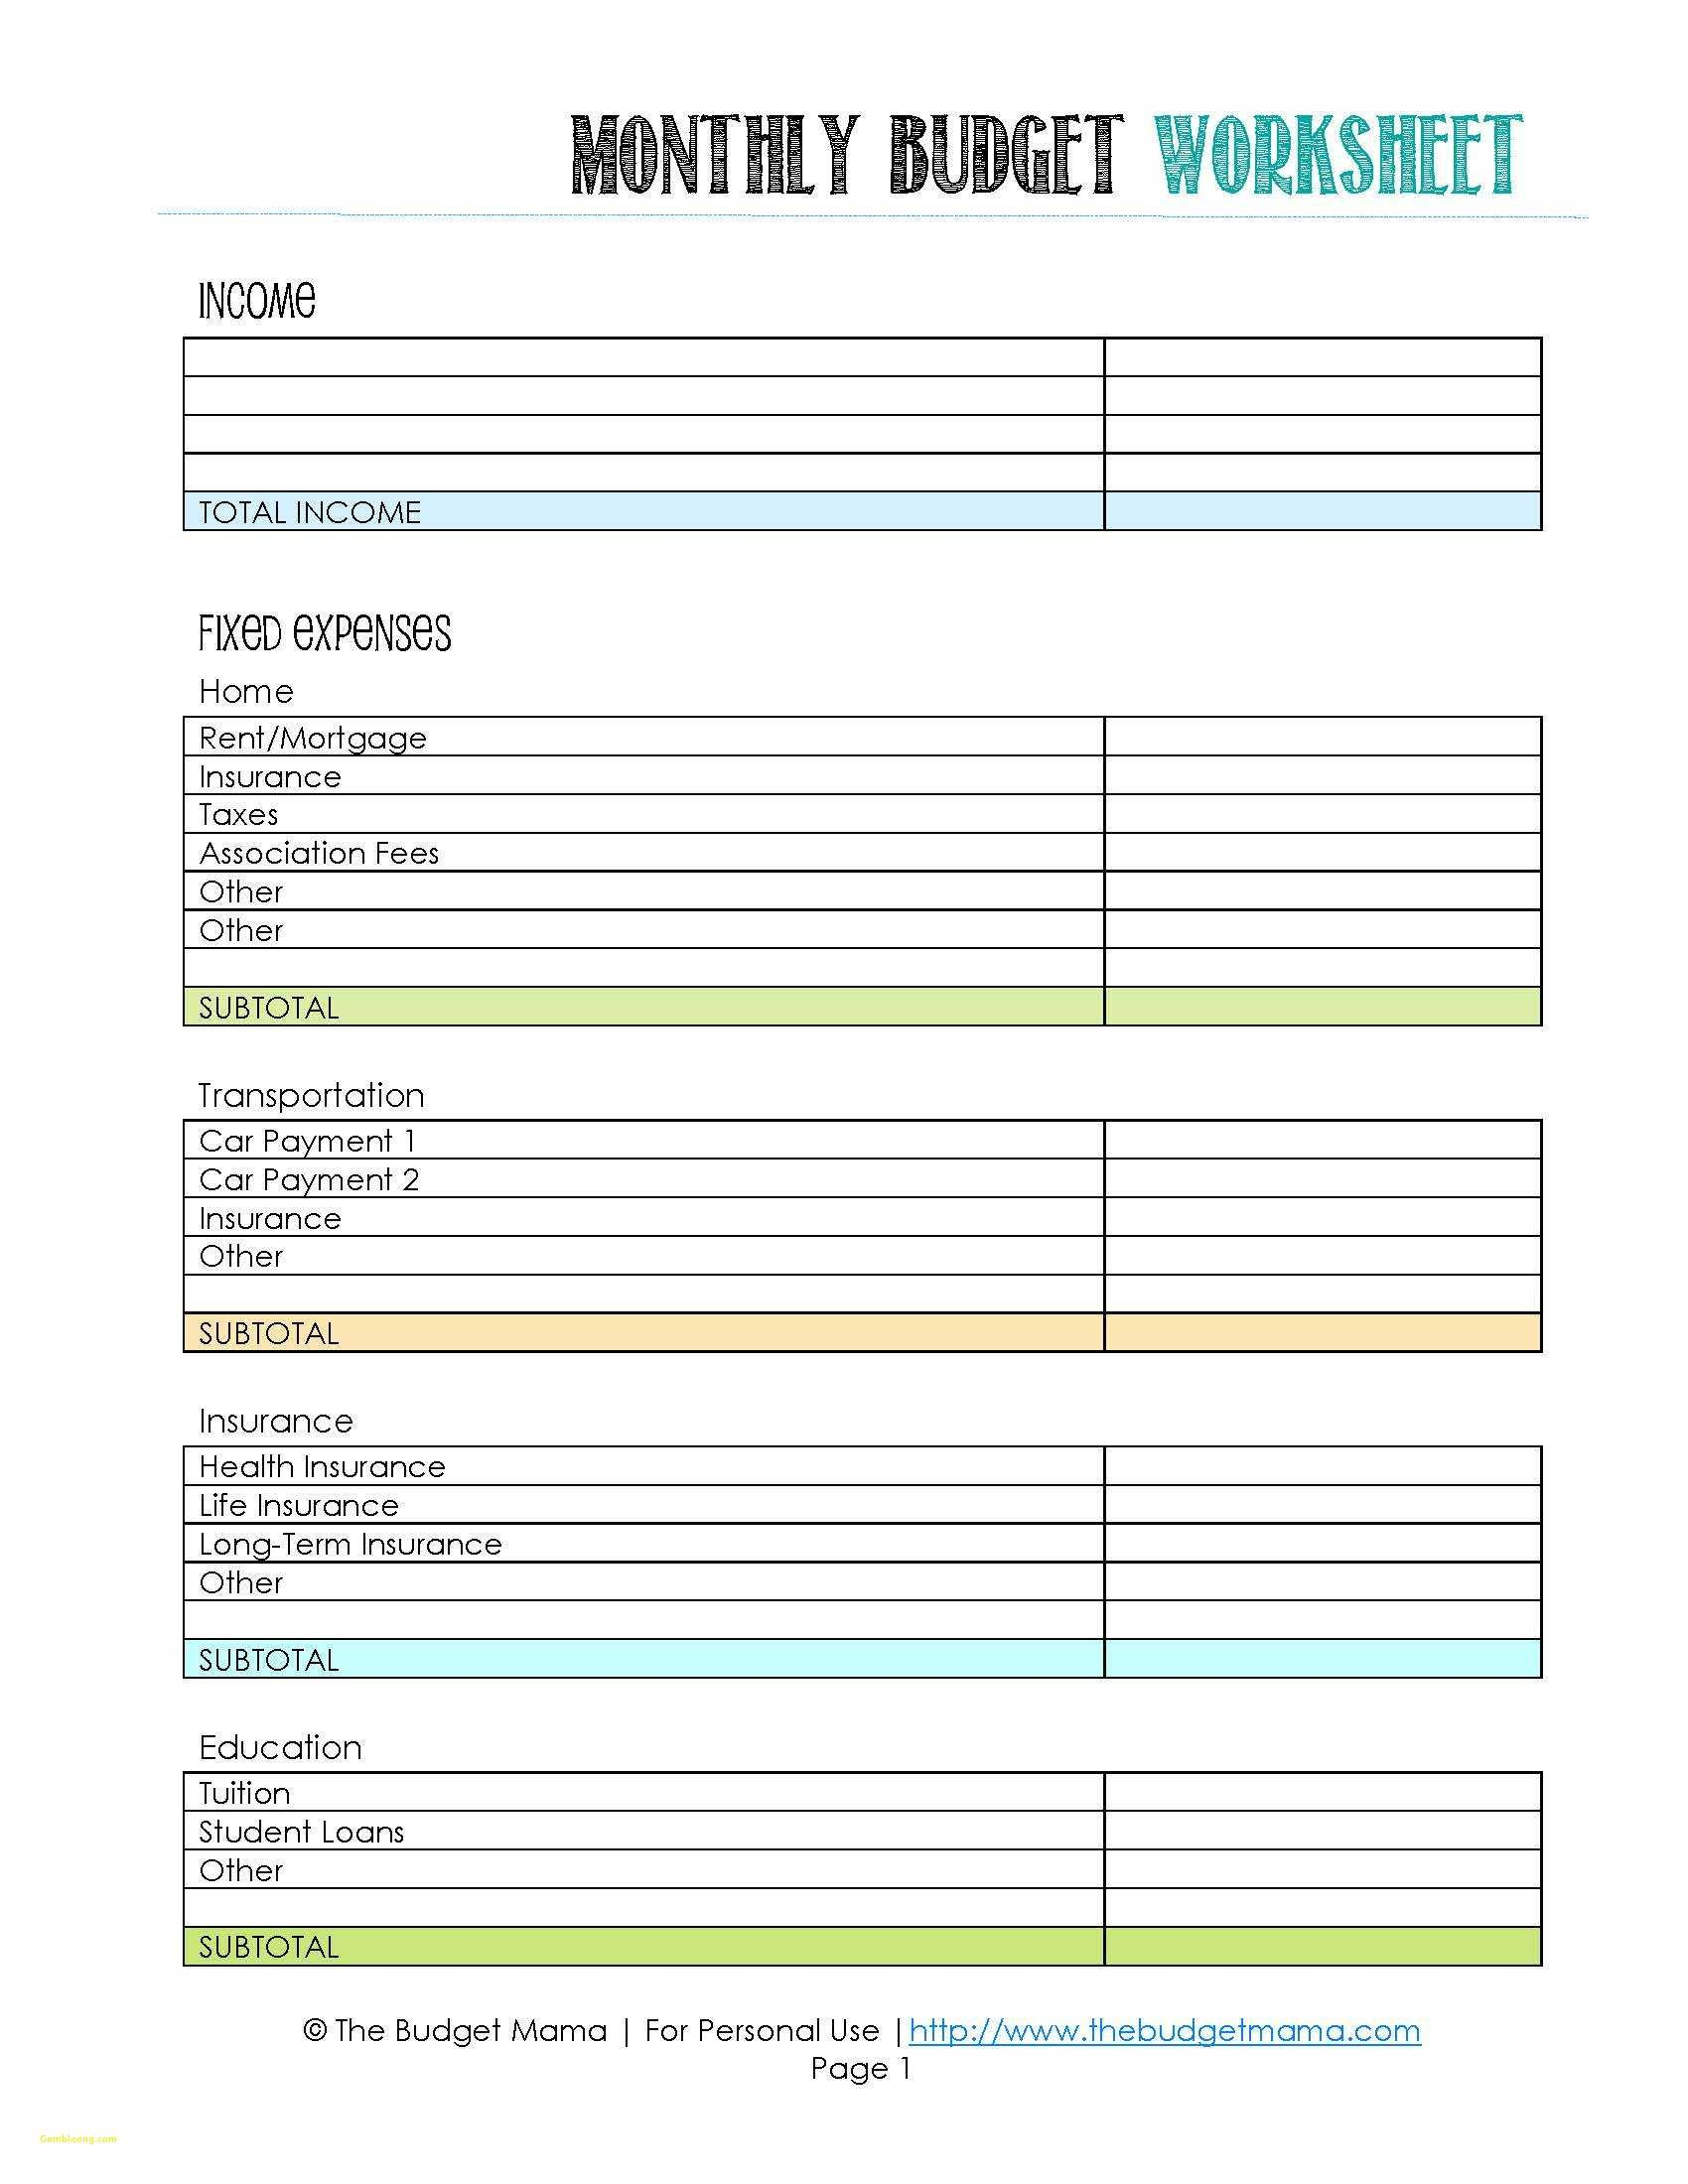 Bill Tracking Spreadsheet Template Also E Personal Bud Budget Family ... Together With Easy Spreadsheet For Monthly Bills